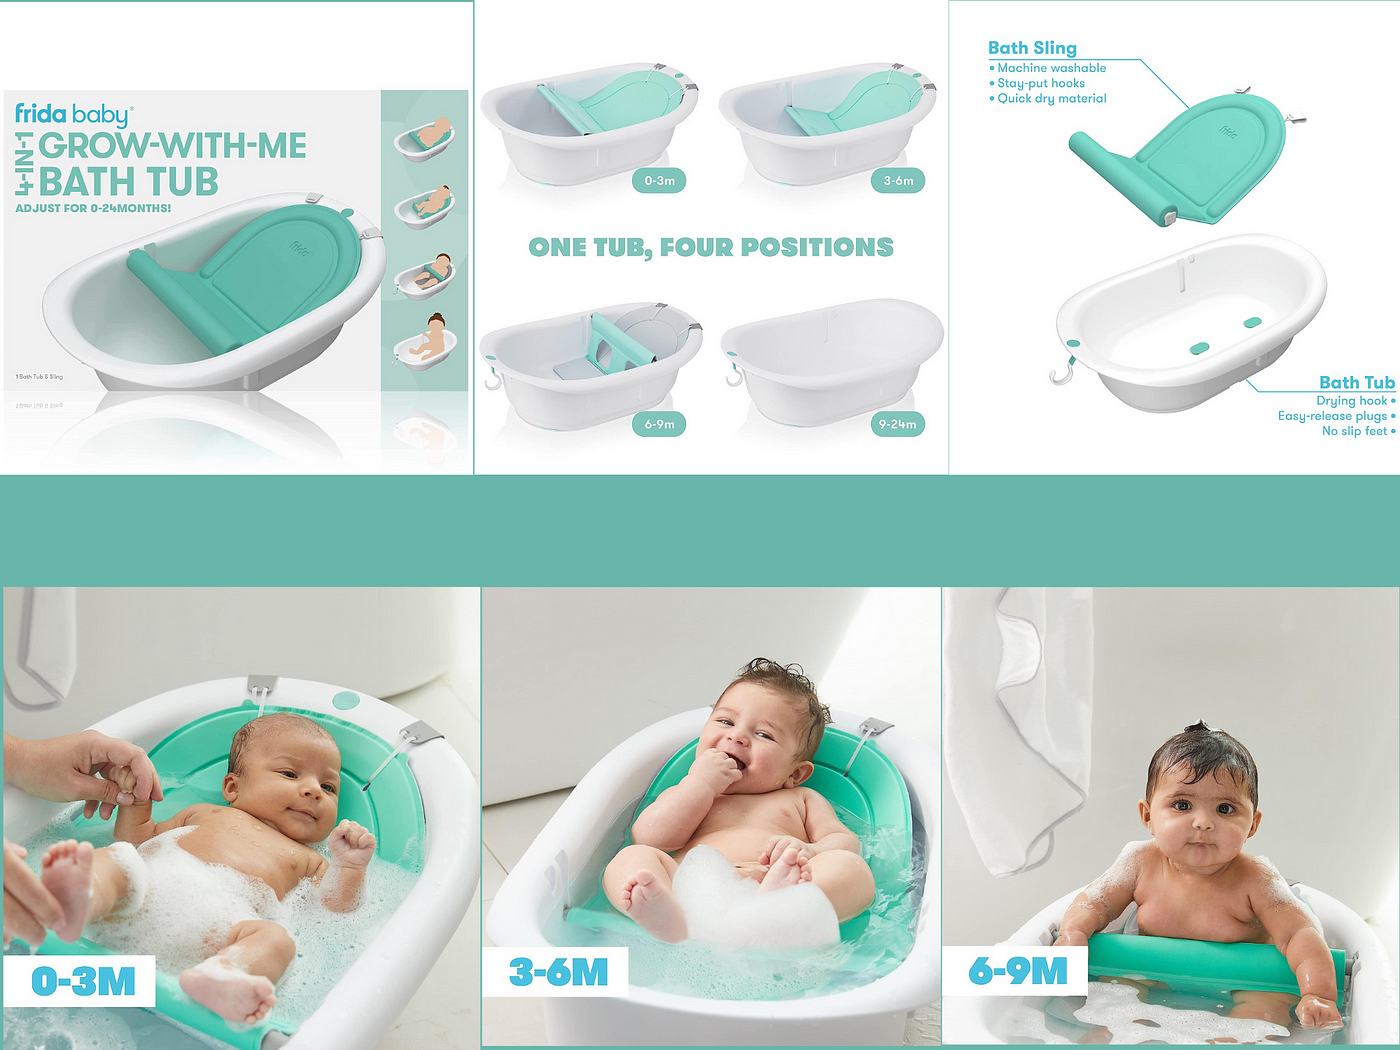 Frida Baby 4 in 1 Grow With Me Tub Review! 